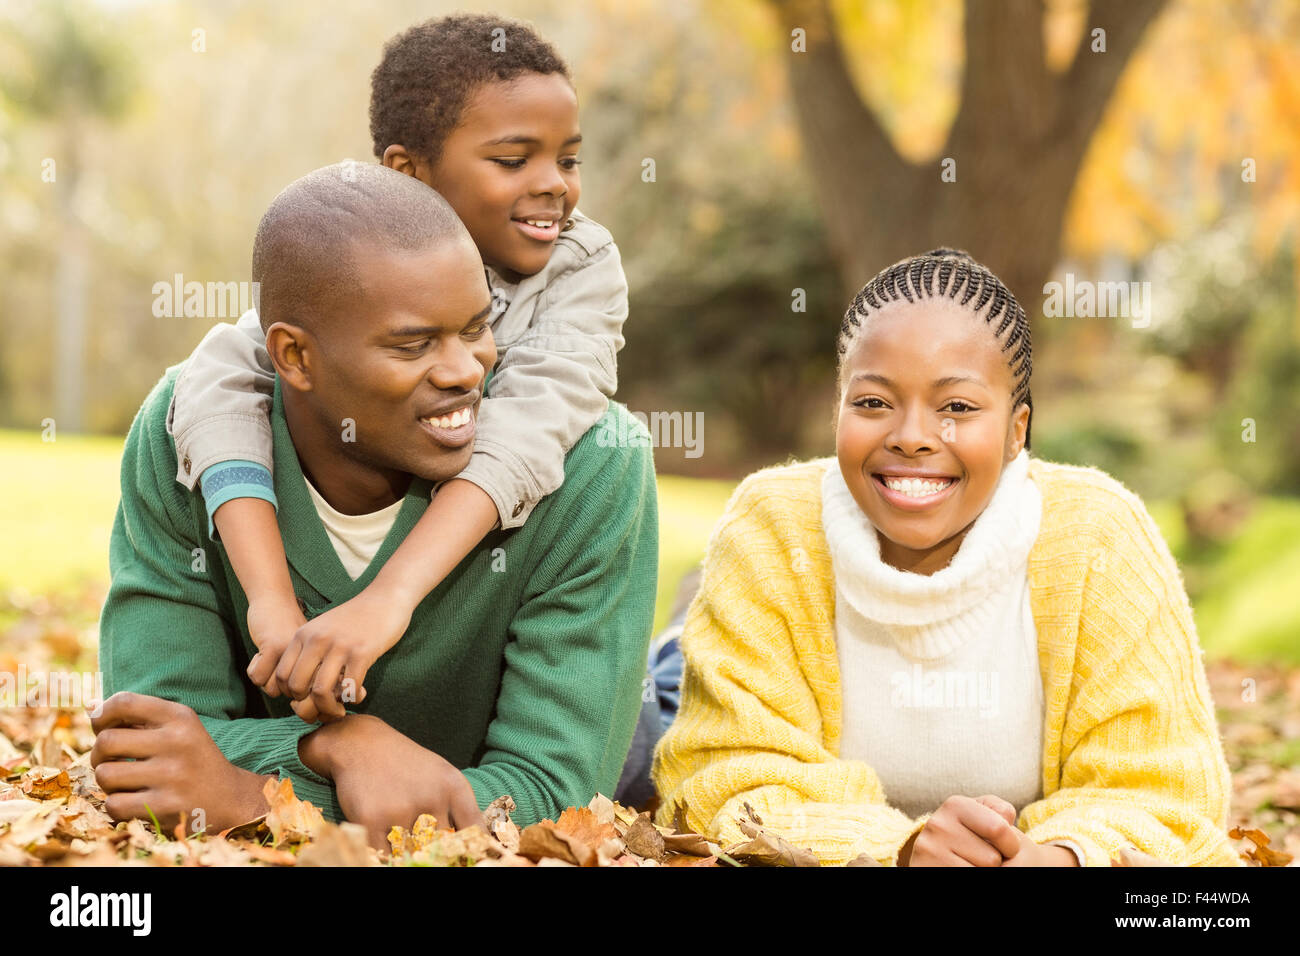 Portrait of a young family lying in leaves Stock Photo